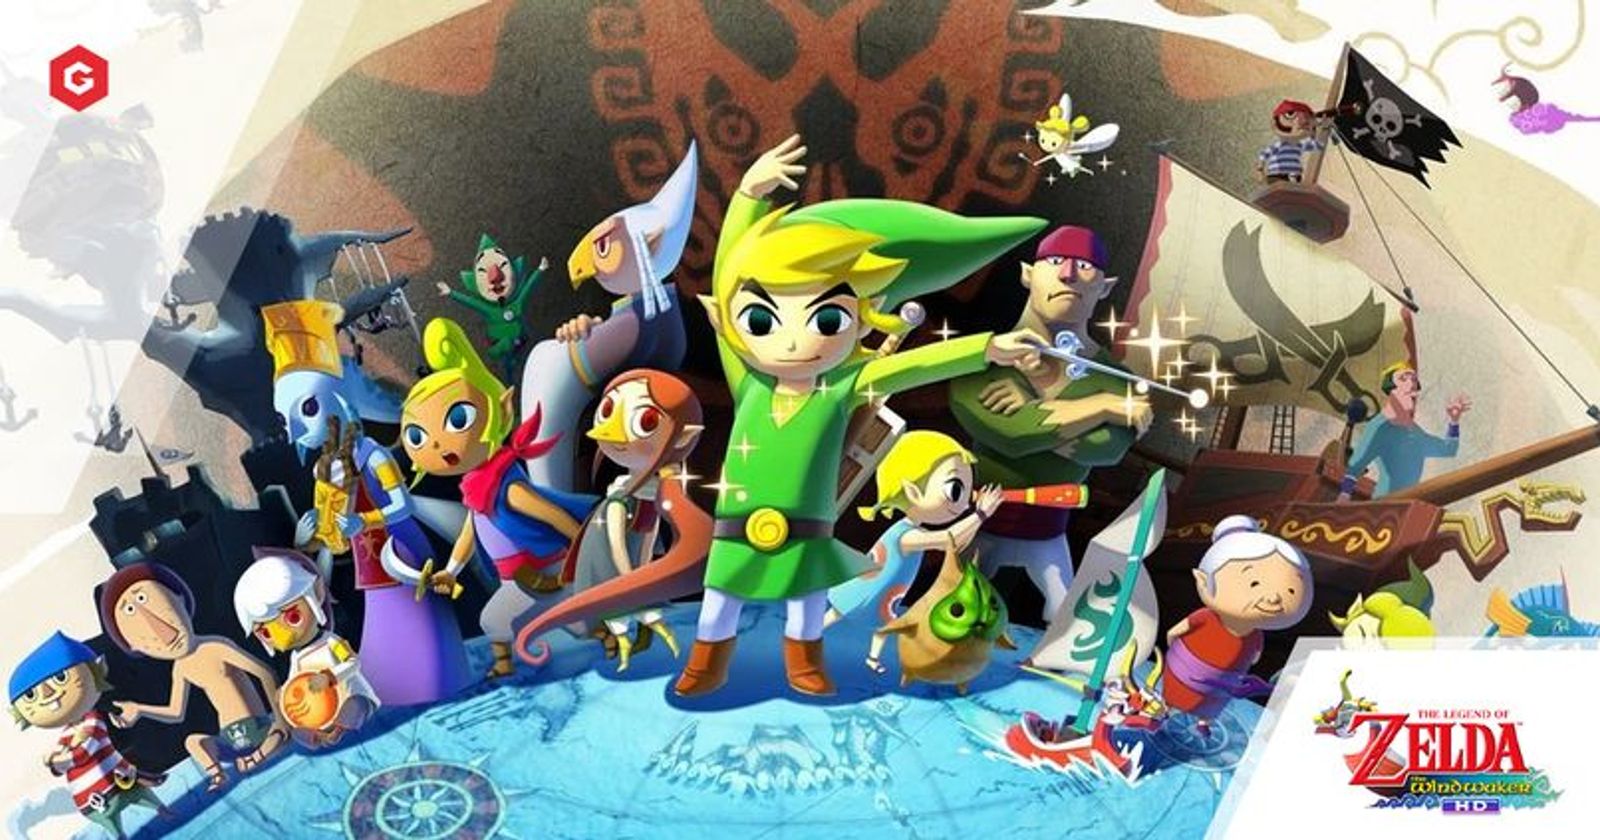 The Legend of Zelda: The Wind Waker HD Preview - Learn About Hero